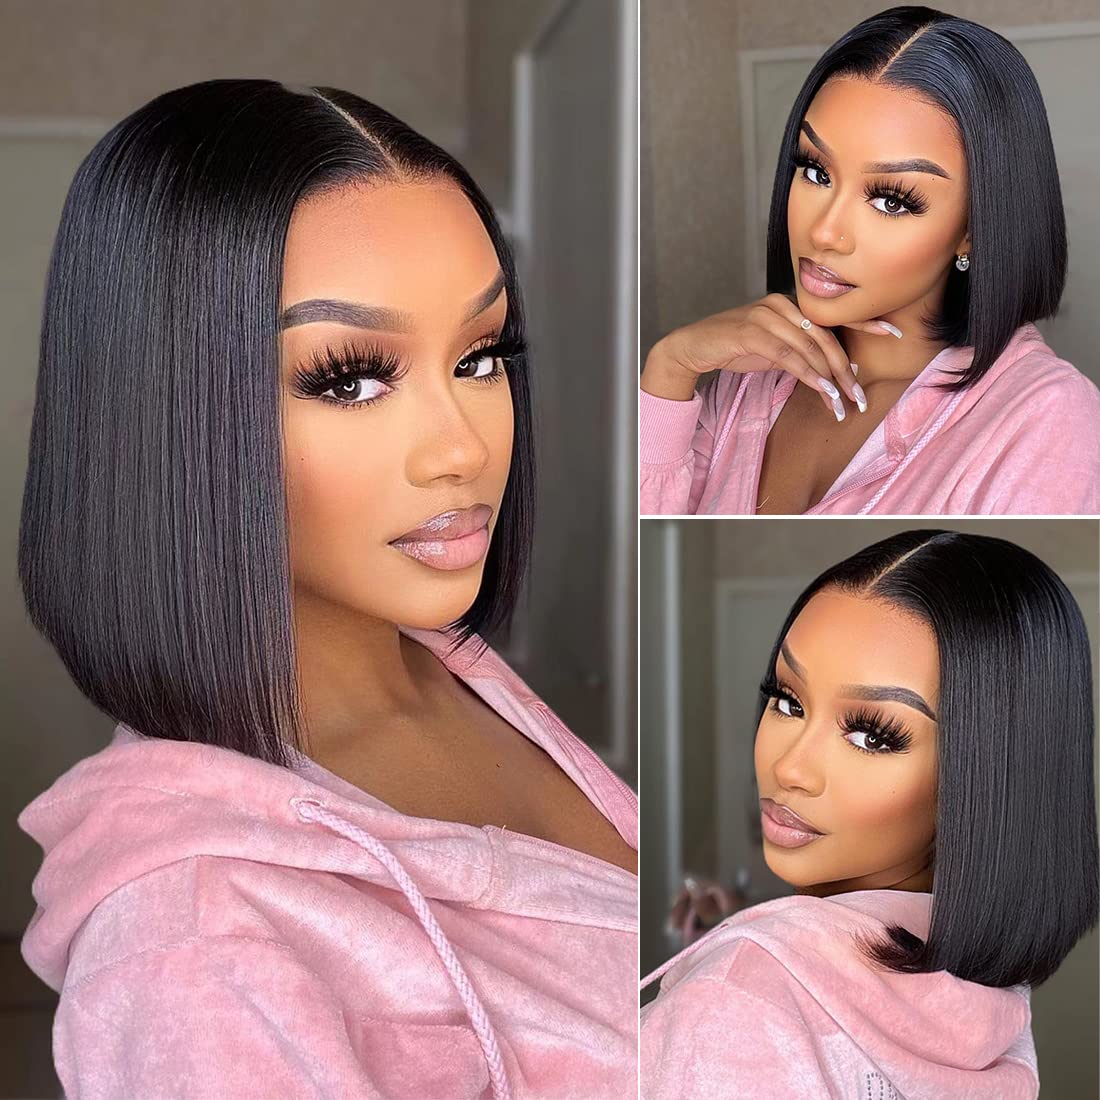 Straight Short Bob Human Hair Lace Front Wigs for Women Brazilian Prepluck Hair 13x4 Glueless Lace Frontal Wig 4x4 Closure Wigs